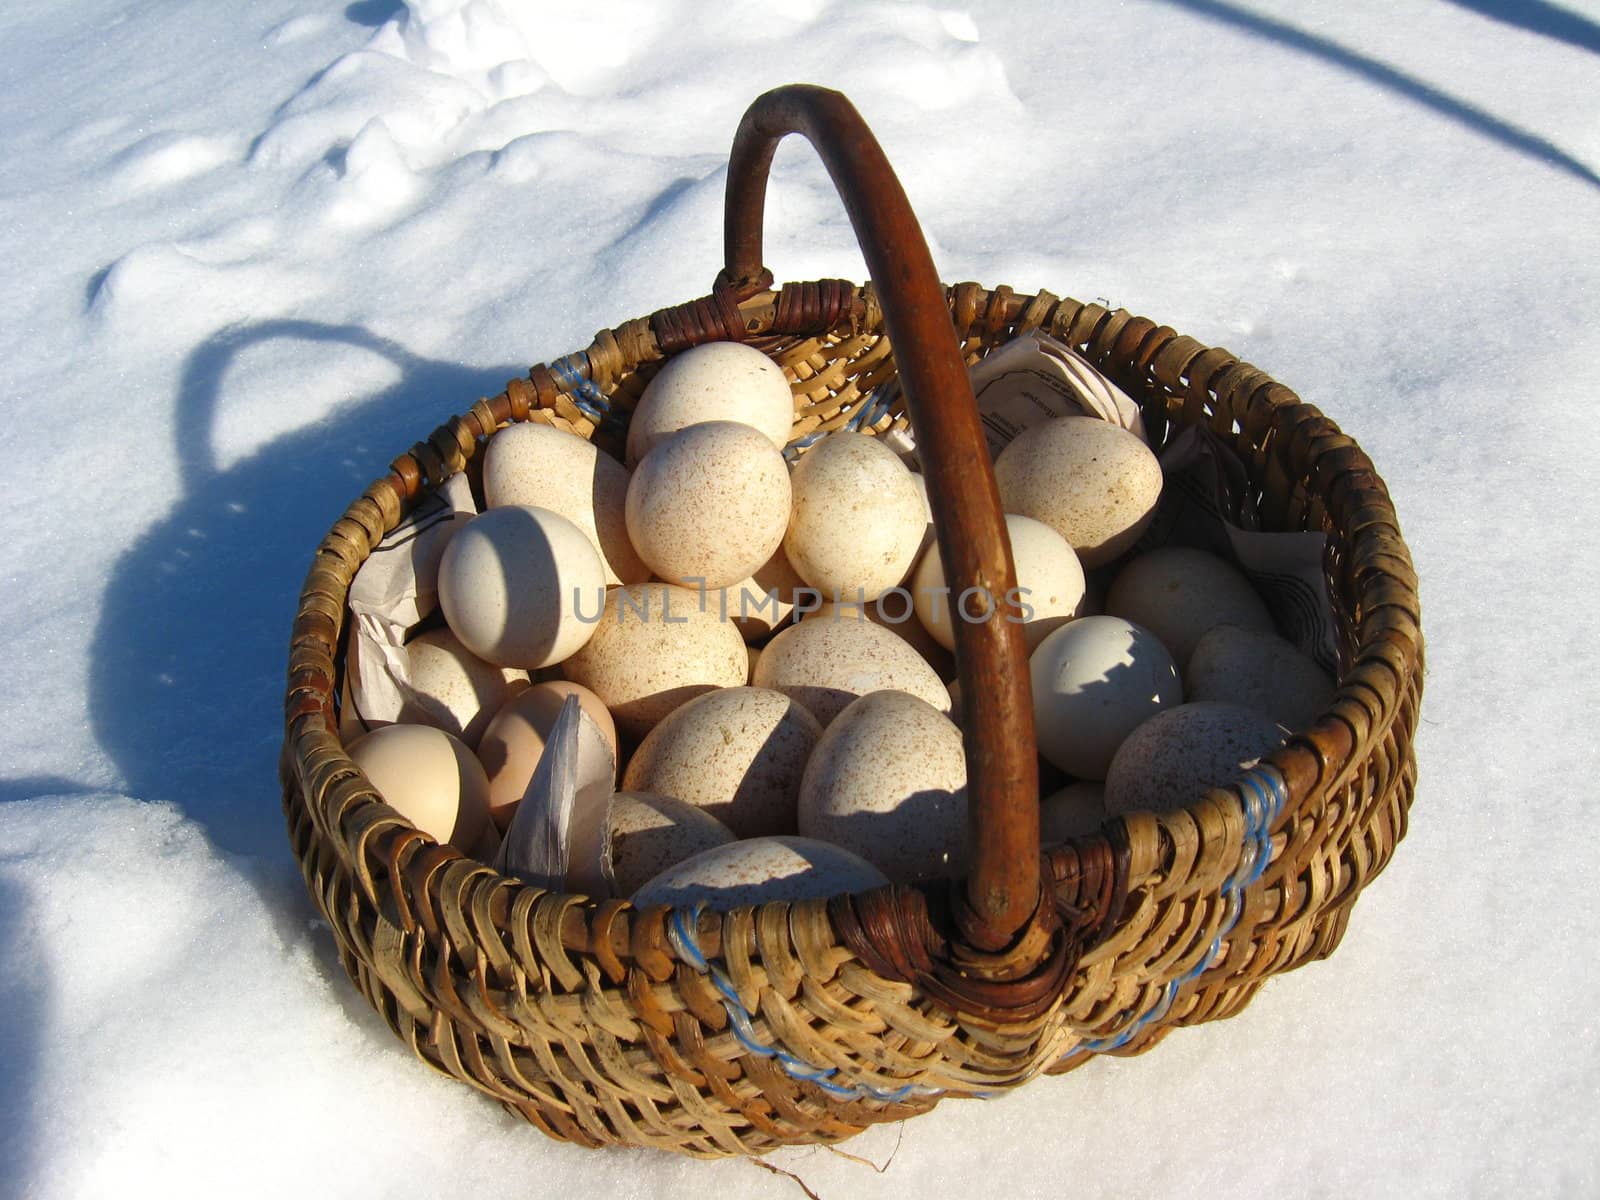 Basket with eggs costing on a snow by alexmak